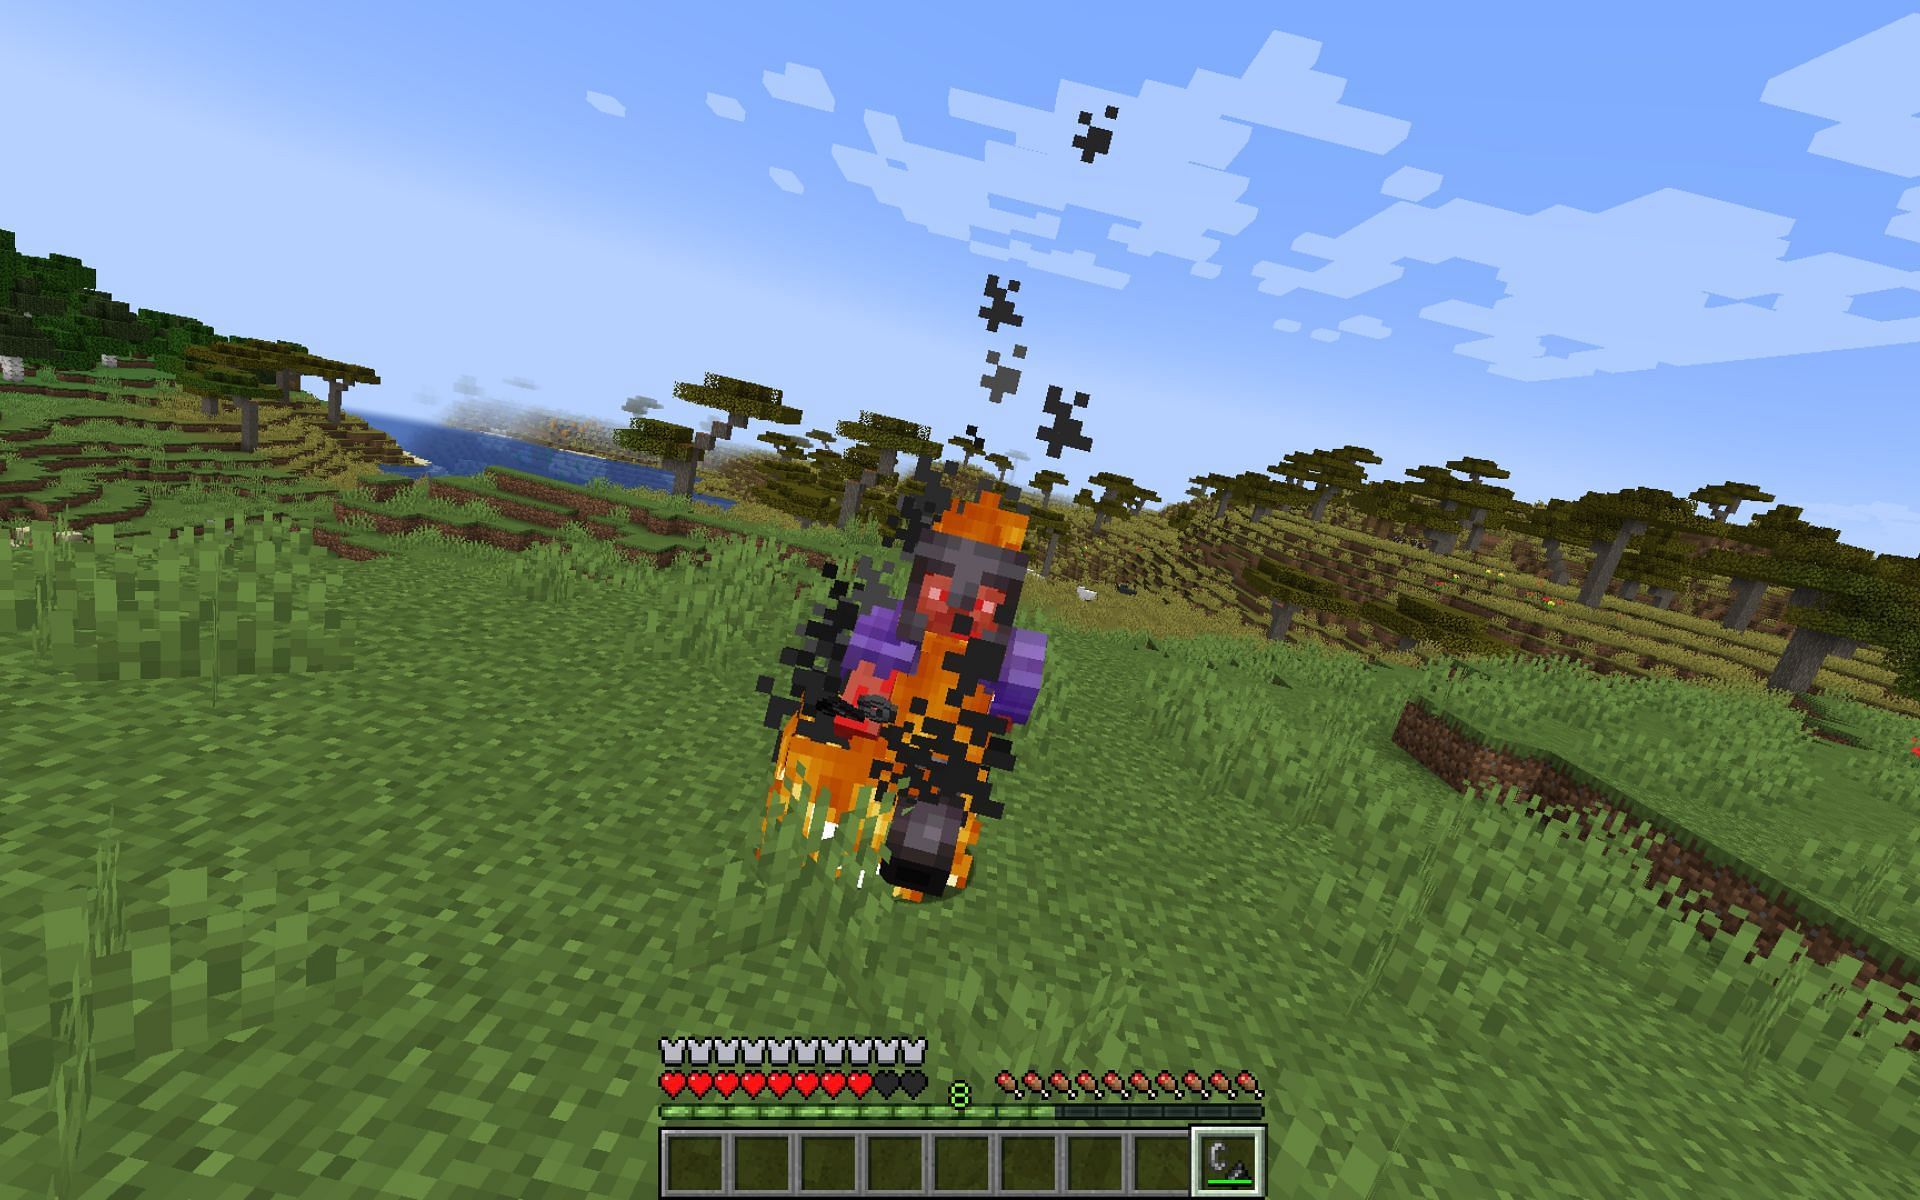 Fire protection enchantment (Image via Minecraft)